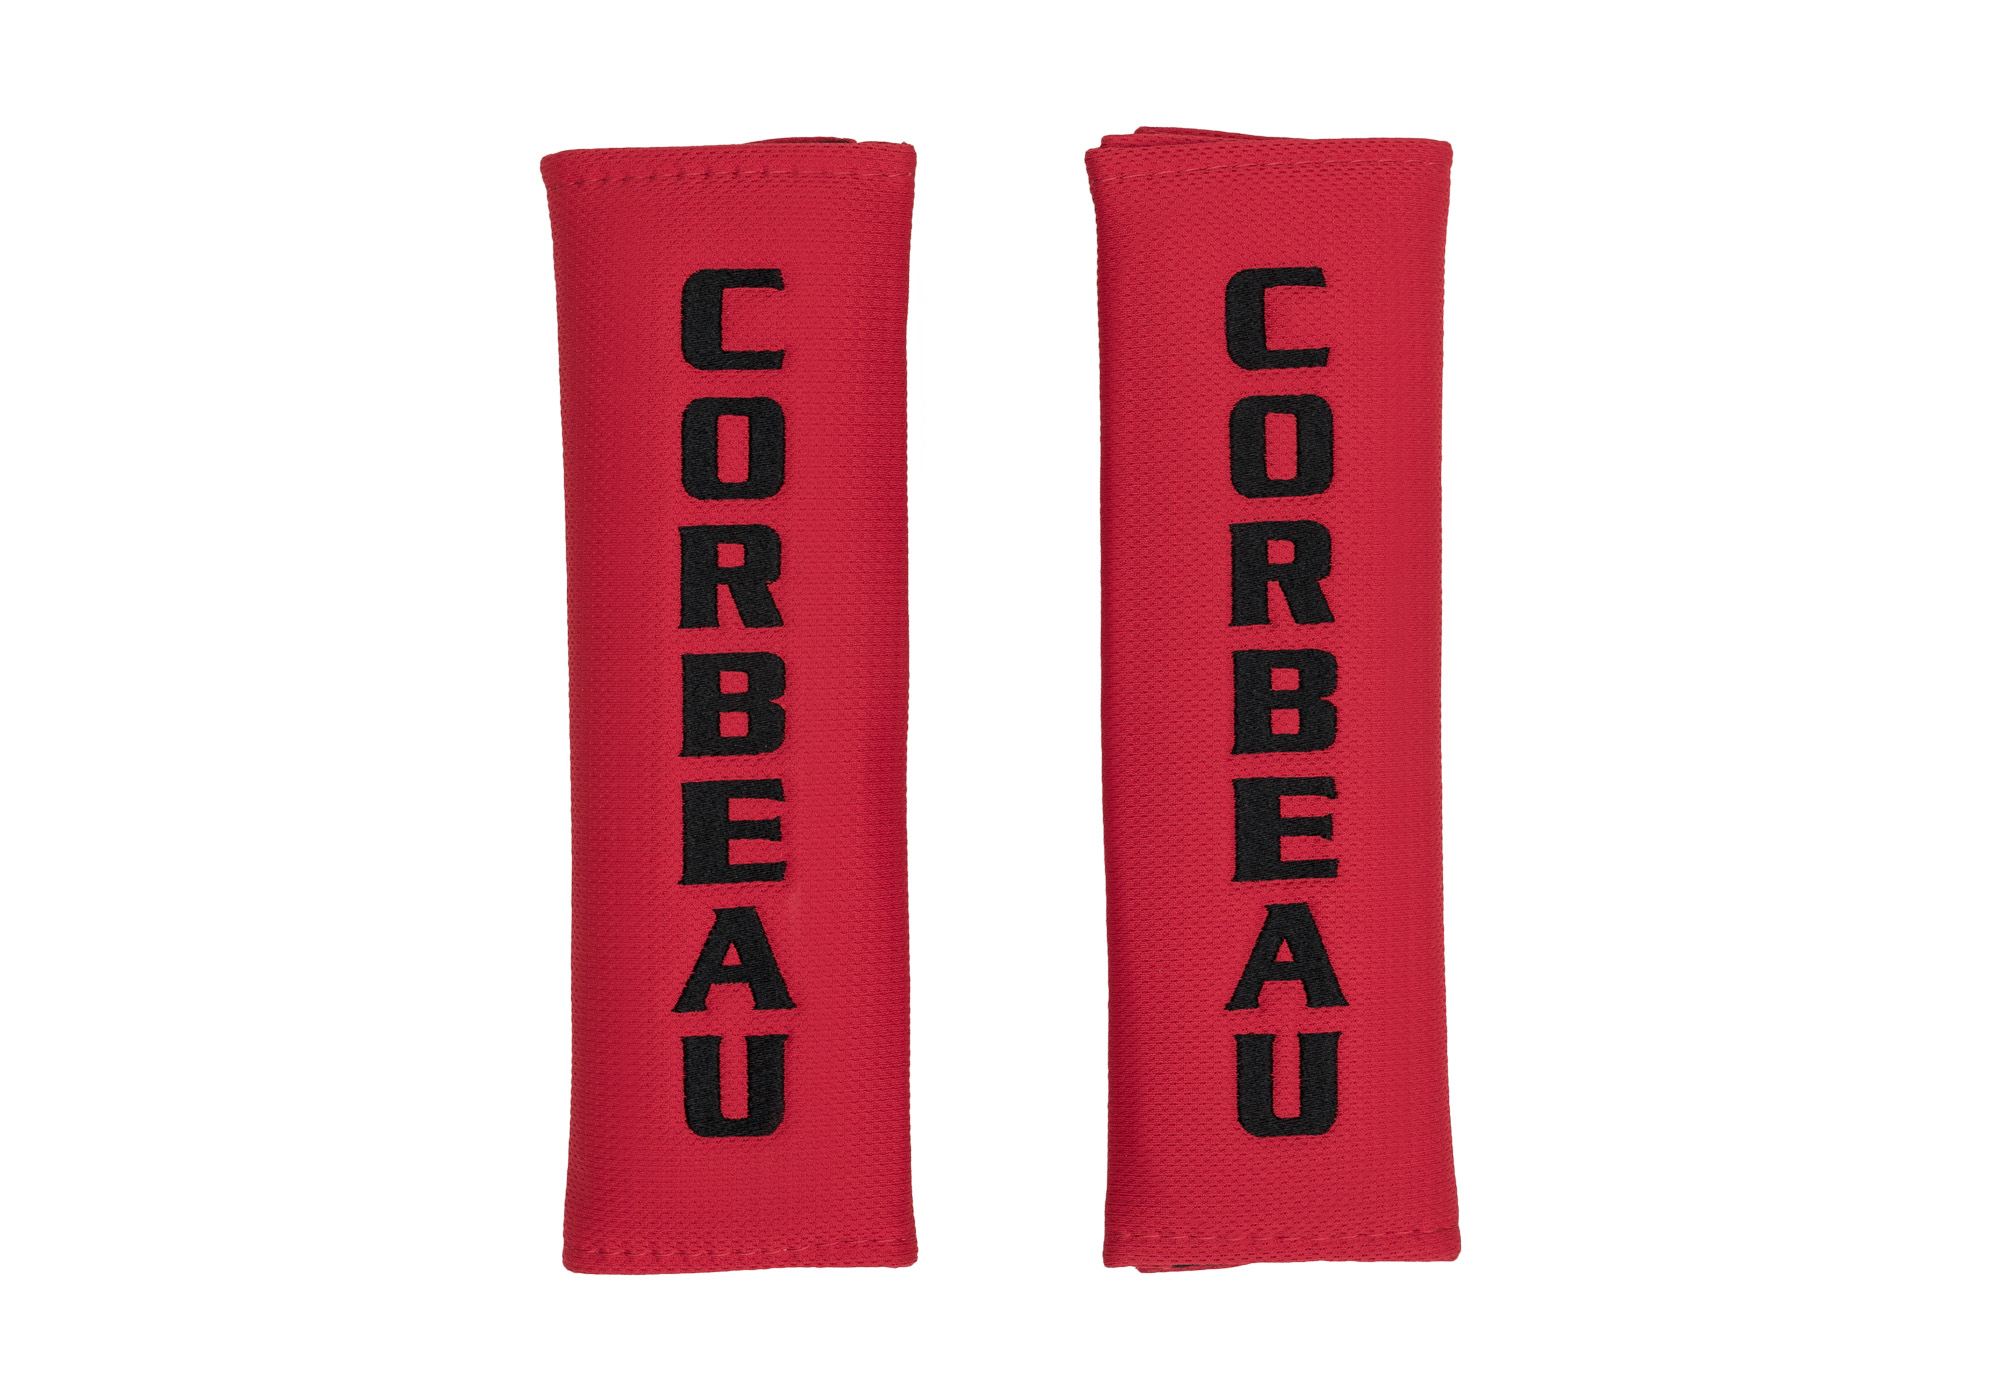 Corbeau Racing Harness Pads, Pair of 3" Red Pads, 50507